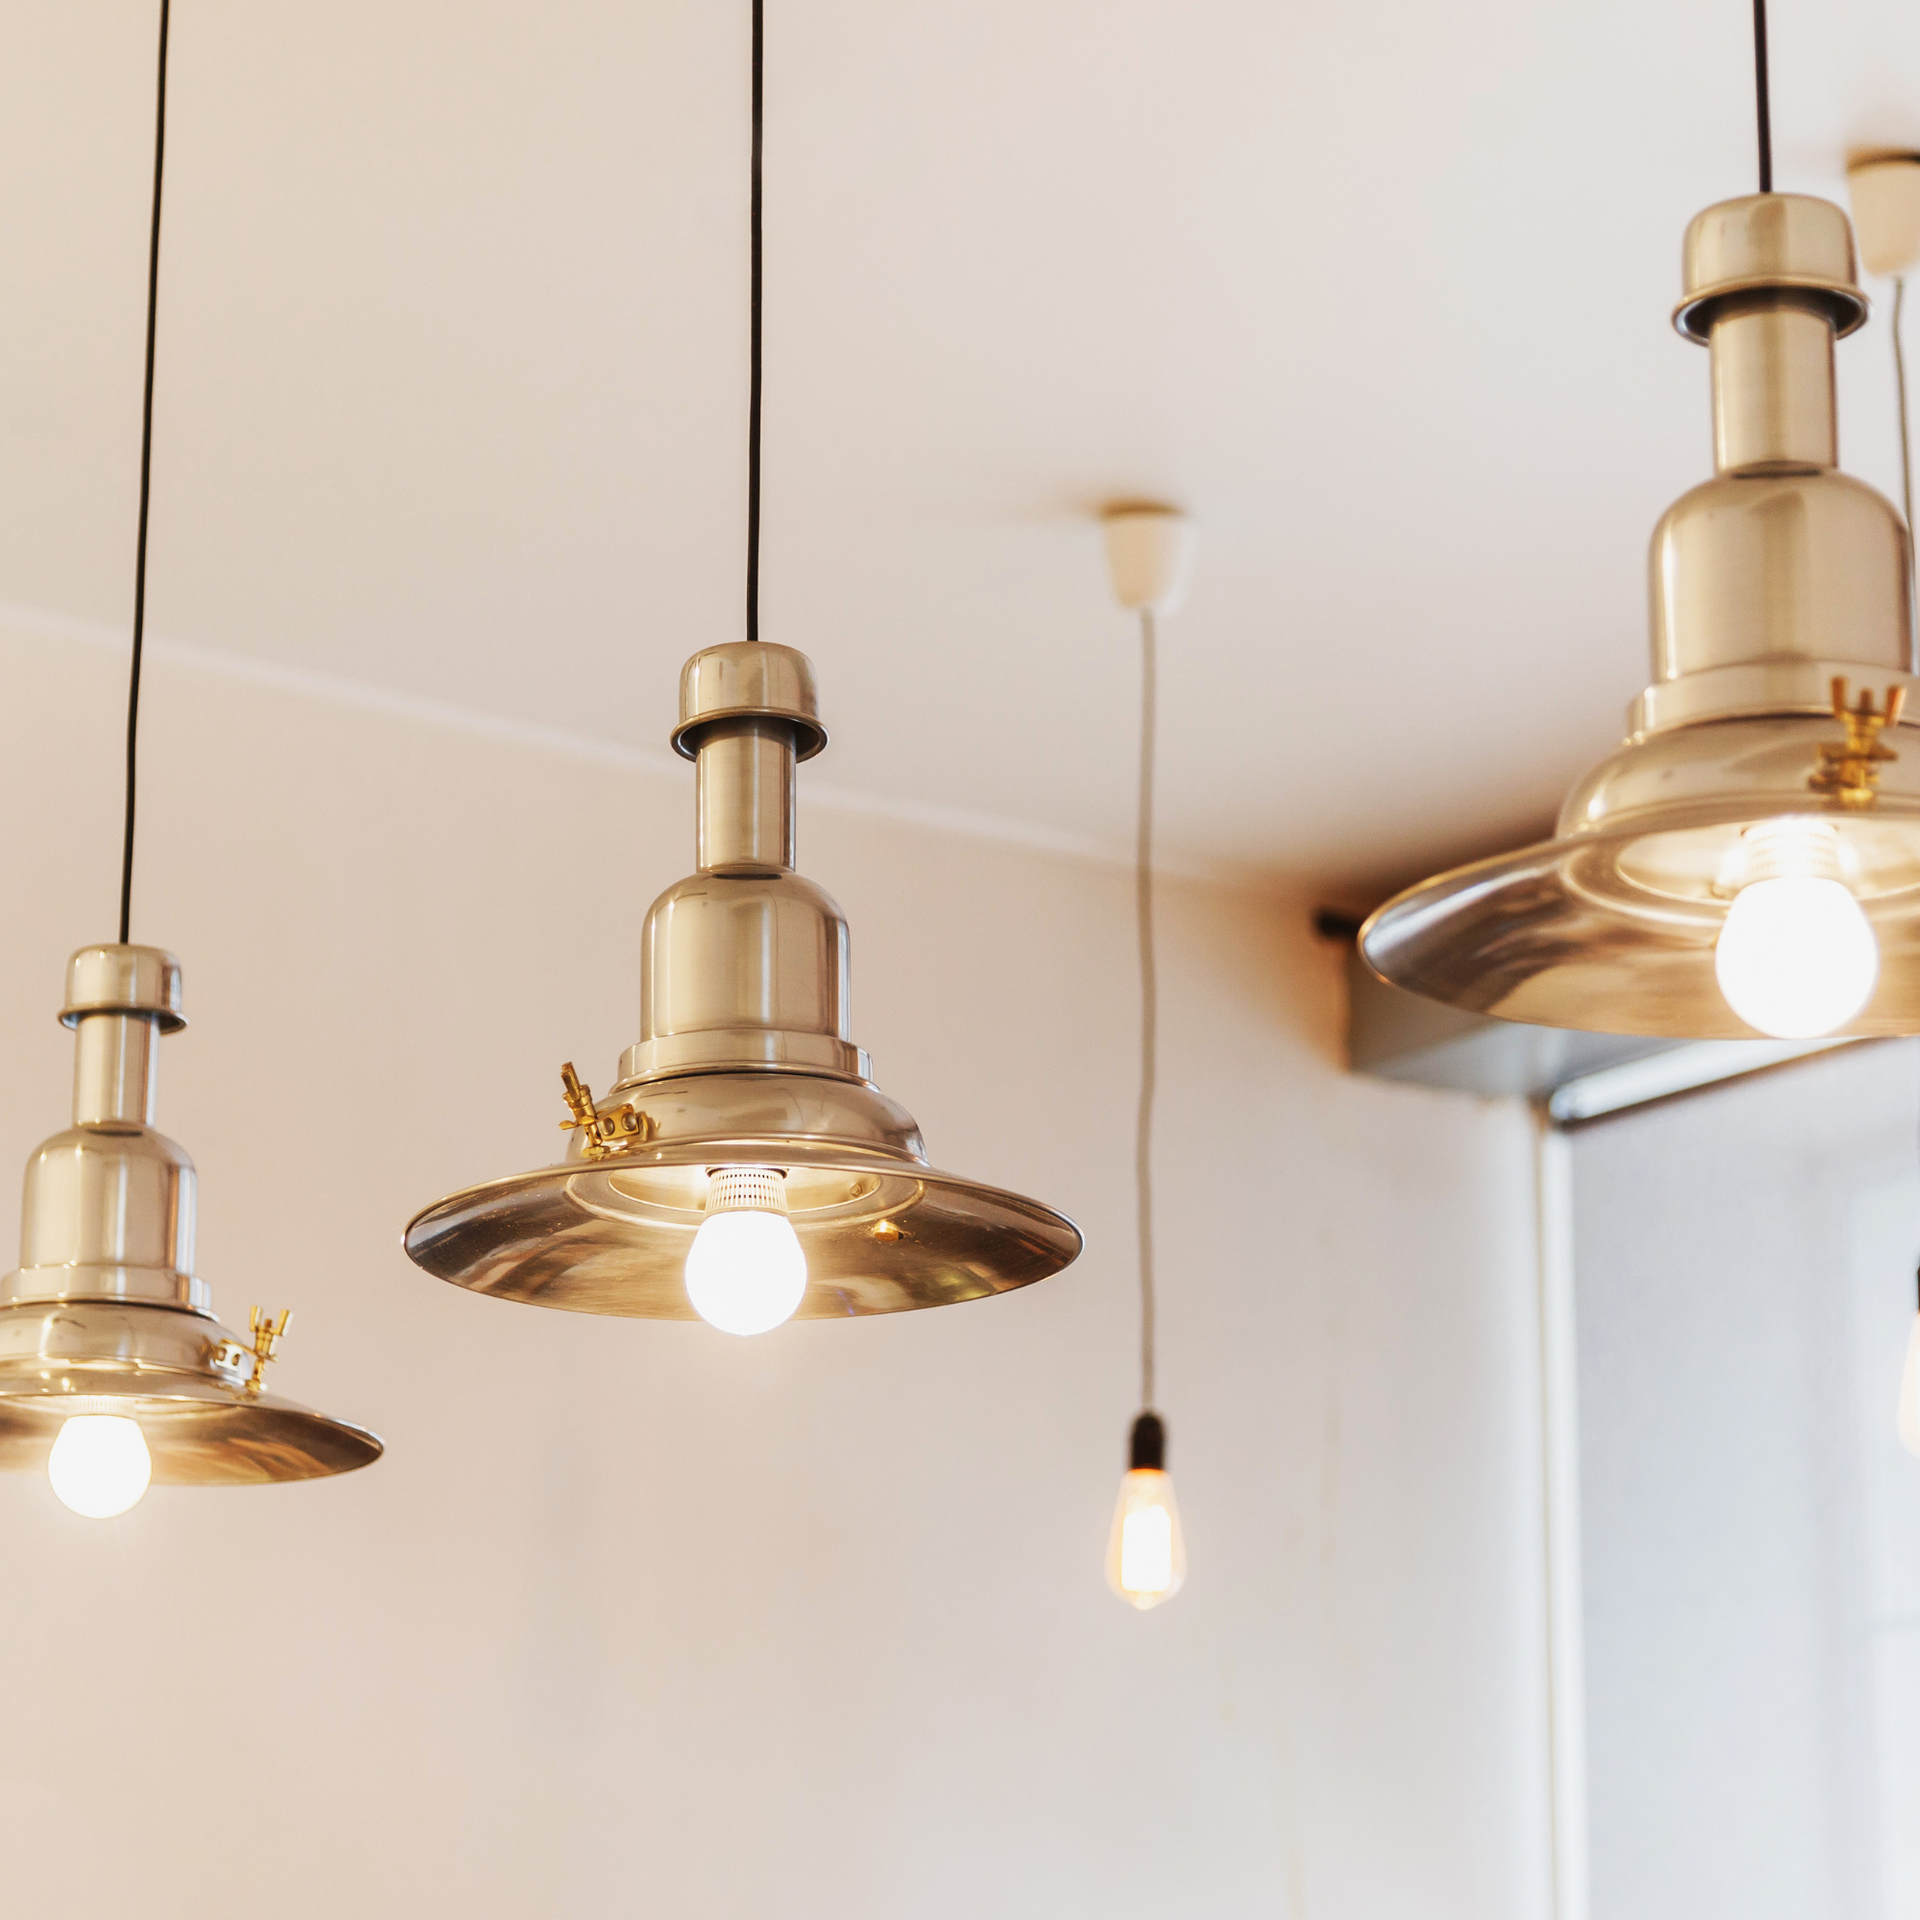 Michael Lawrence Electric Inc
- Three pendant lights are hanging from the ceiling in a room